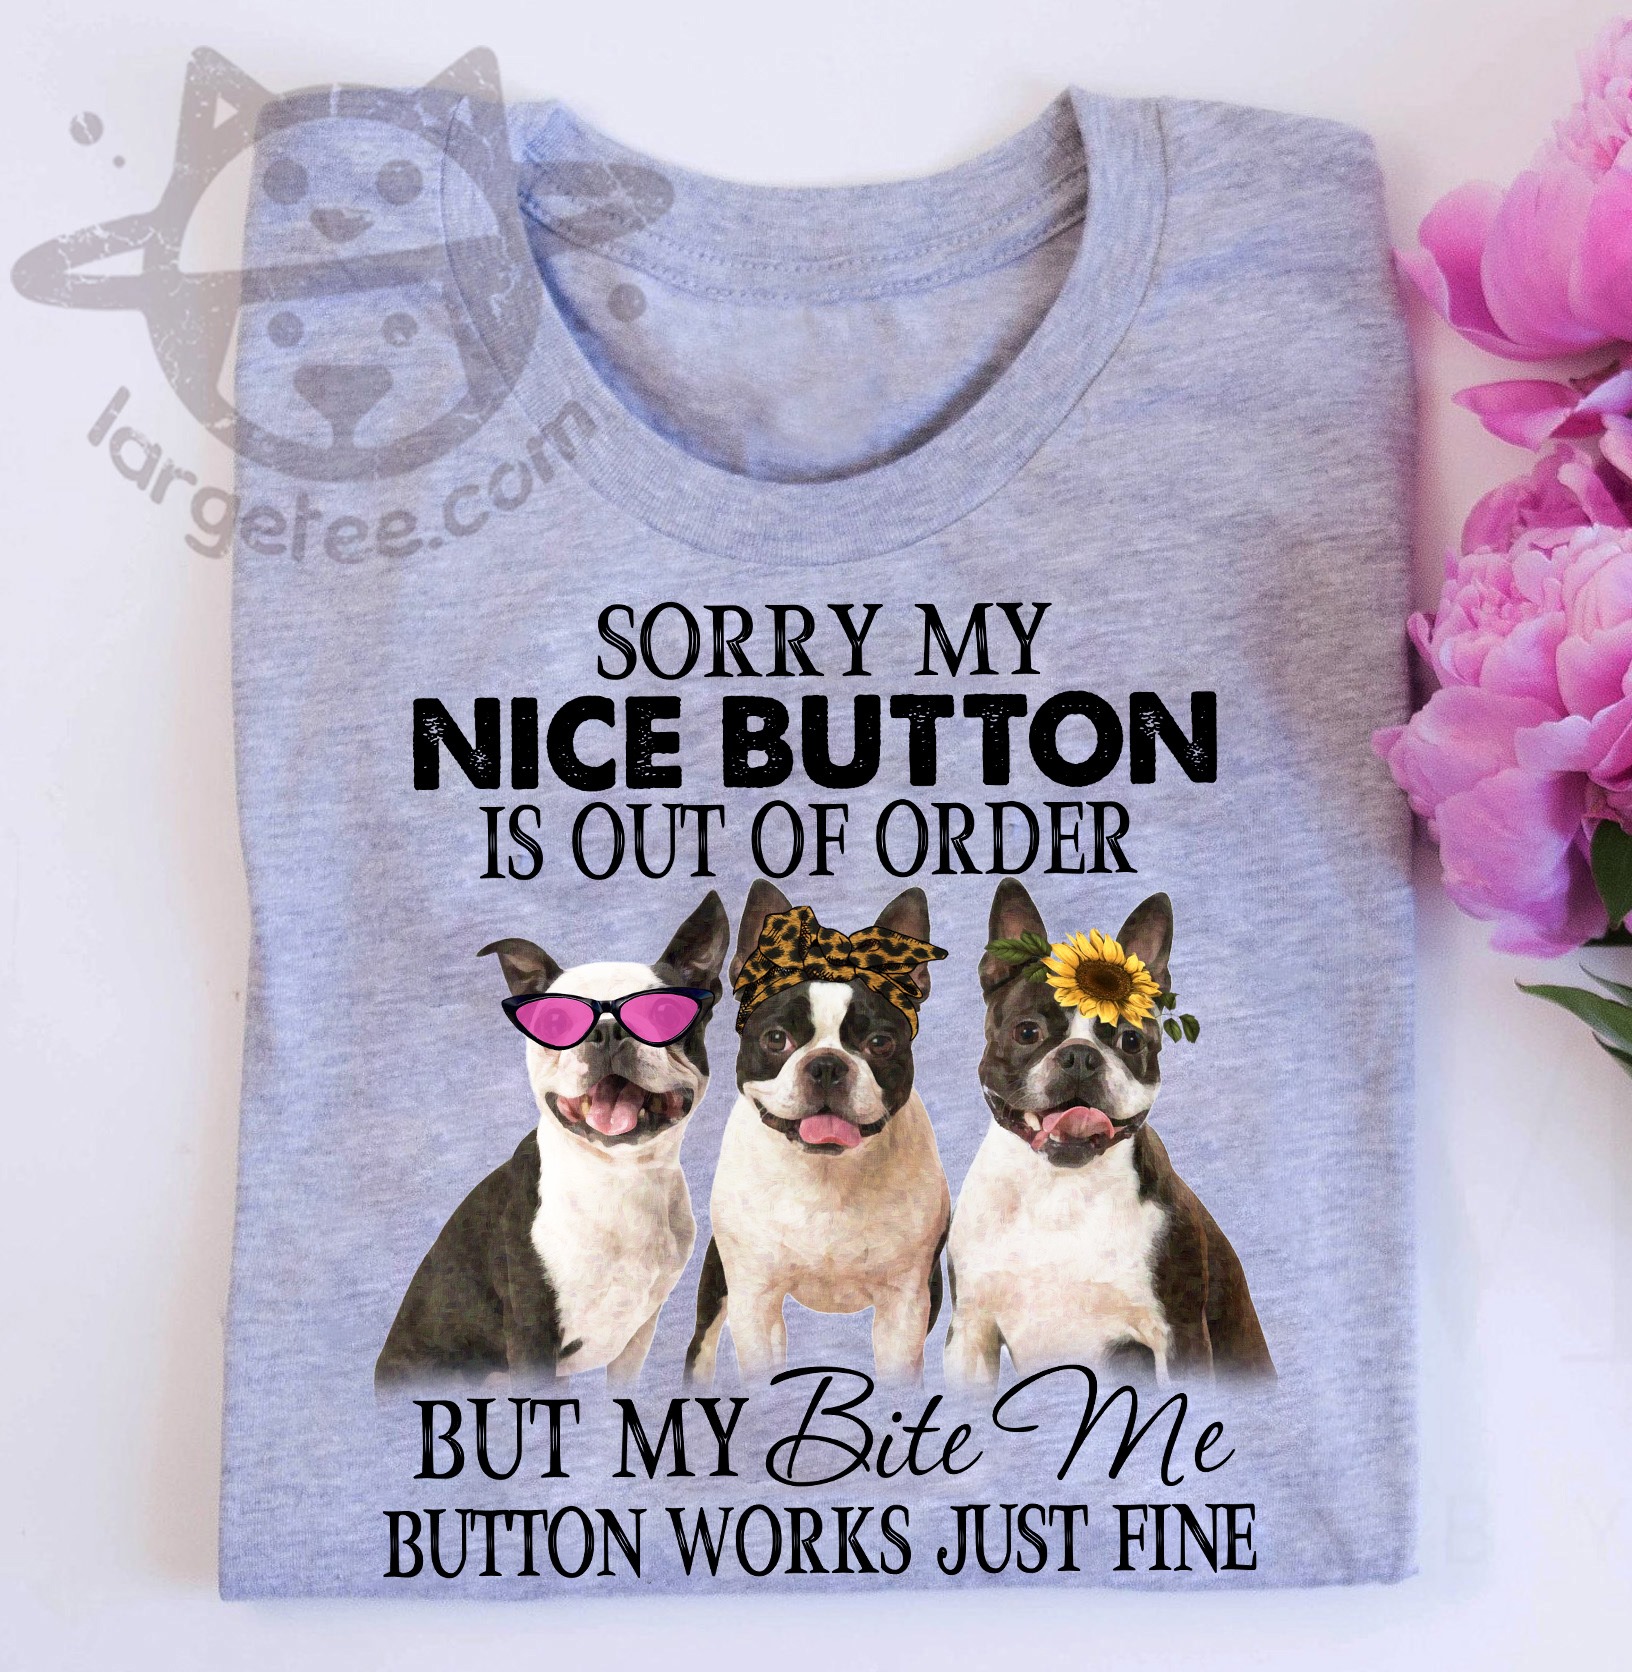 Sorry my nice button is out of order but my bite me button works just fine - Pug dog